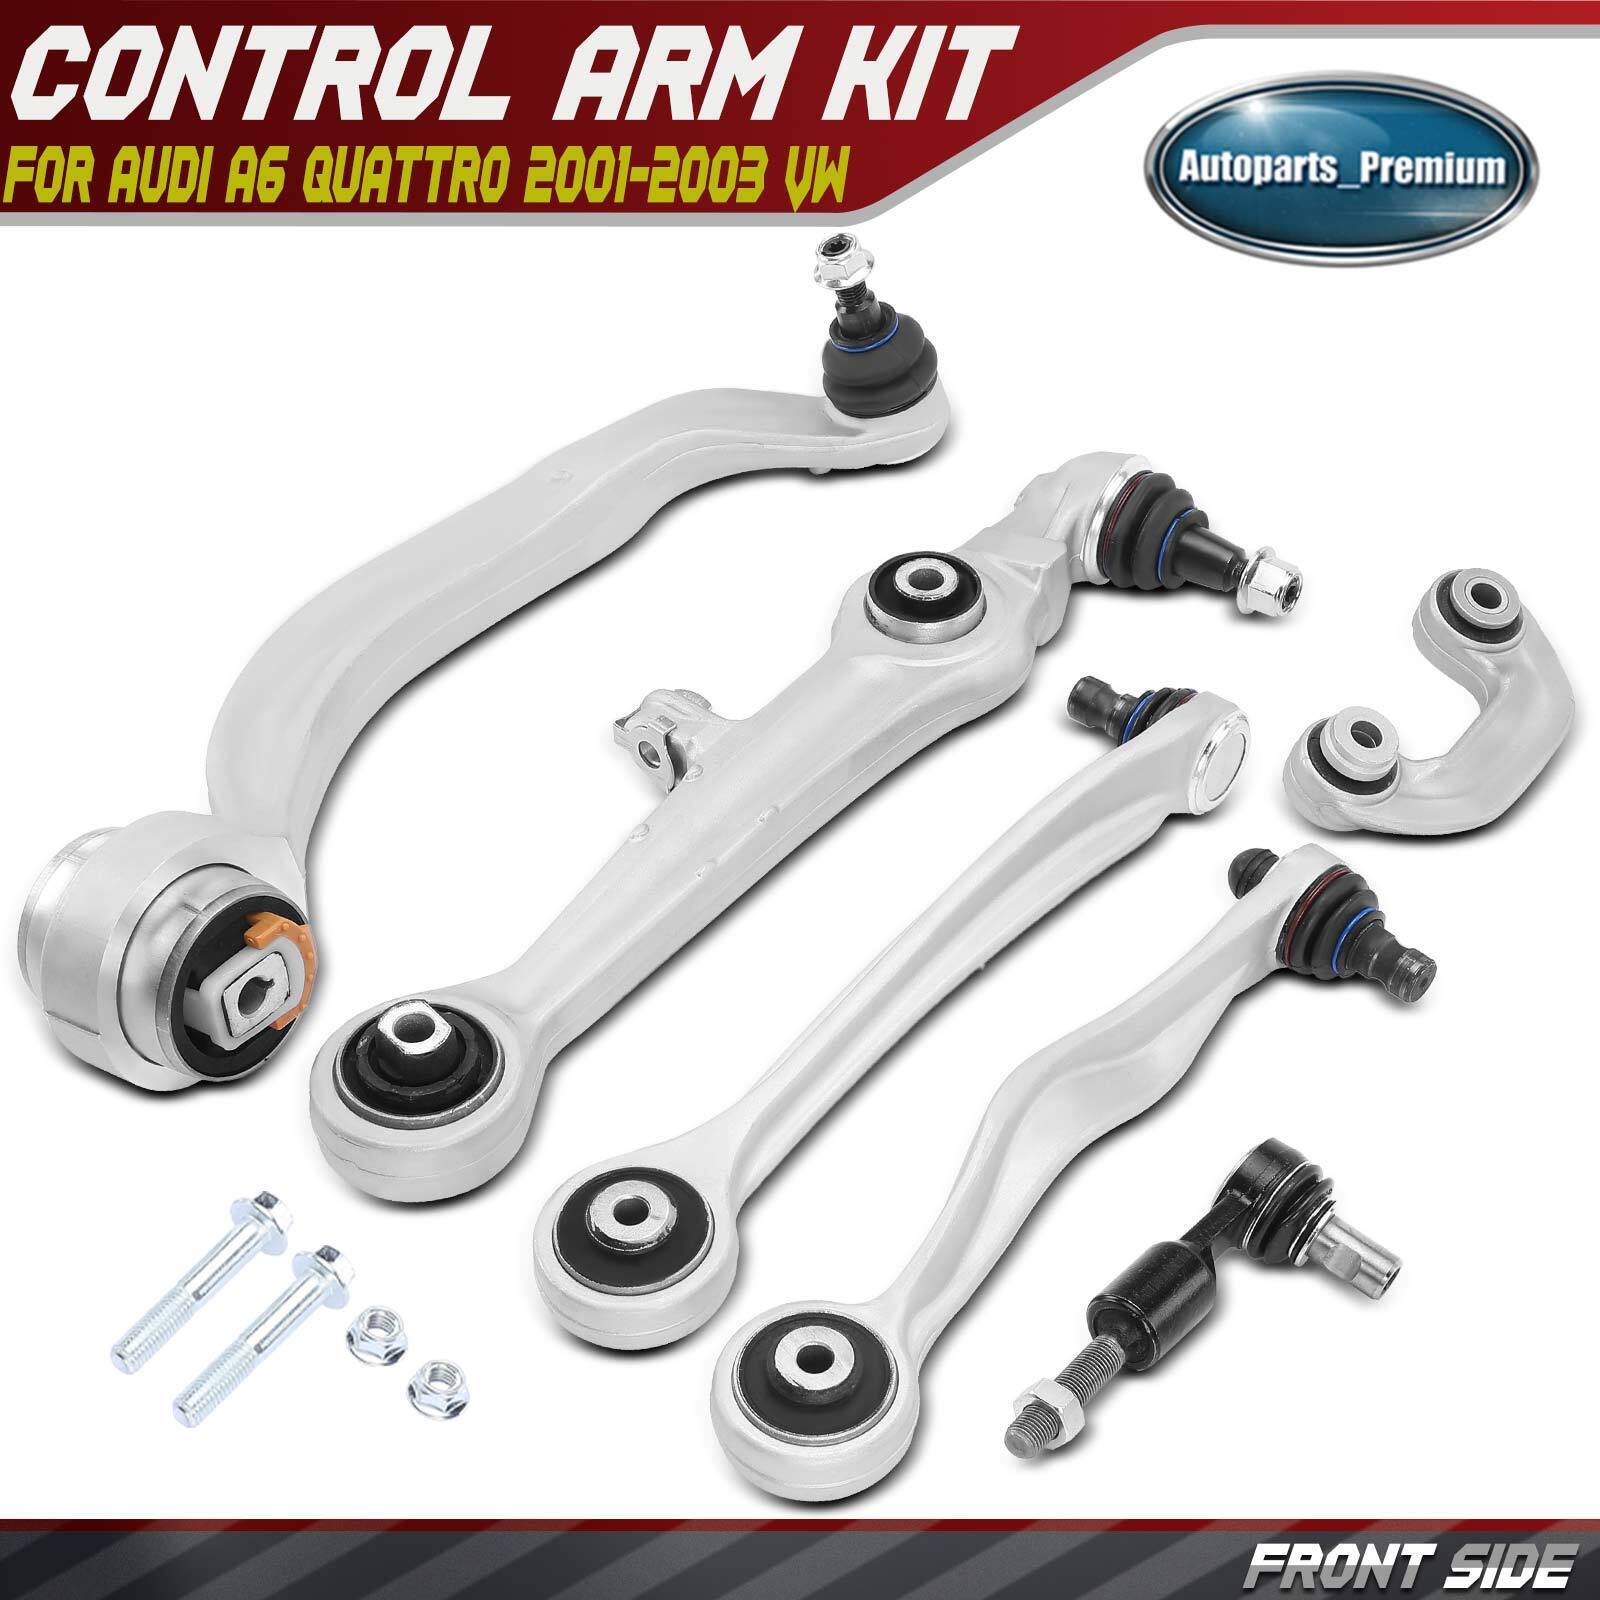 6x Front Control Arm Sway Bar Link Tie Rod End for Audi A6 Quattro 2001-2003 VW